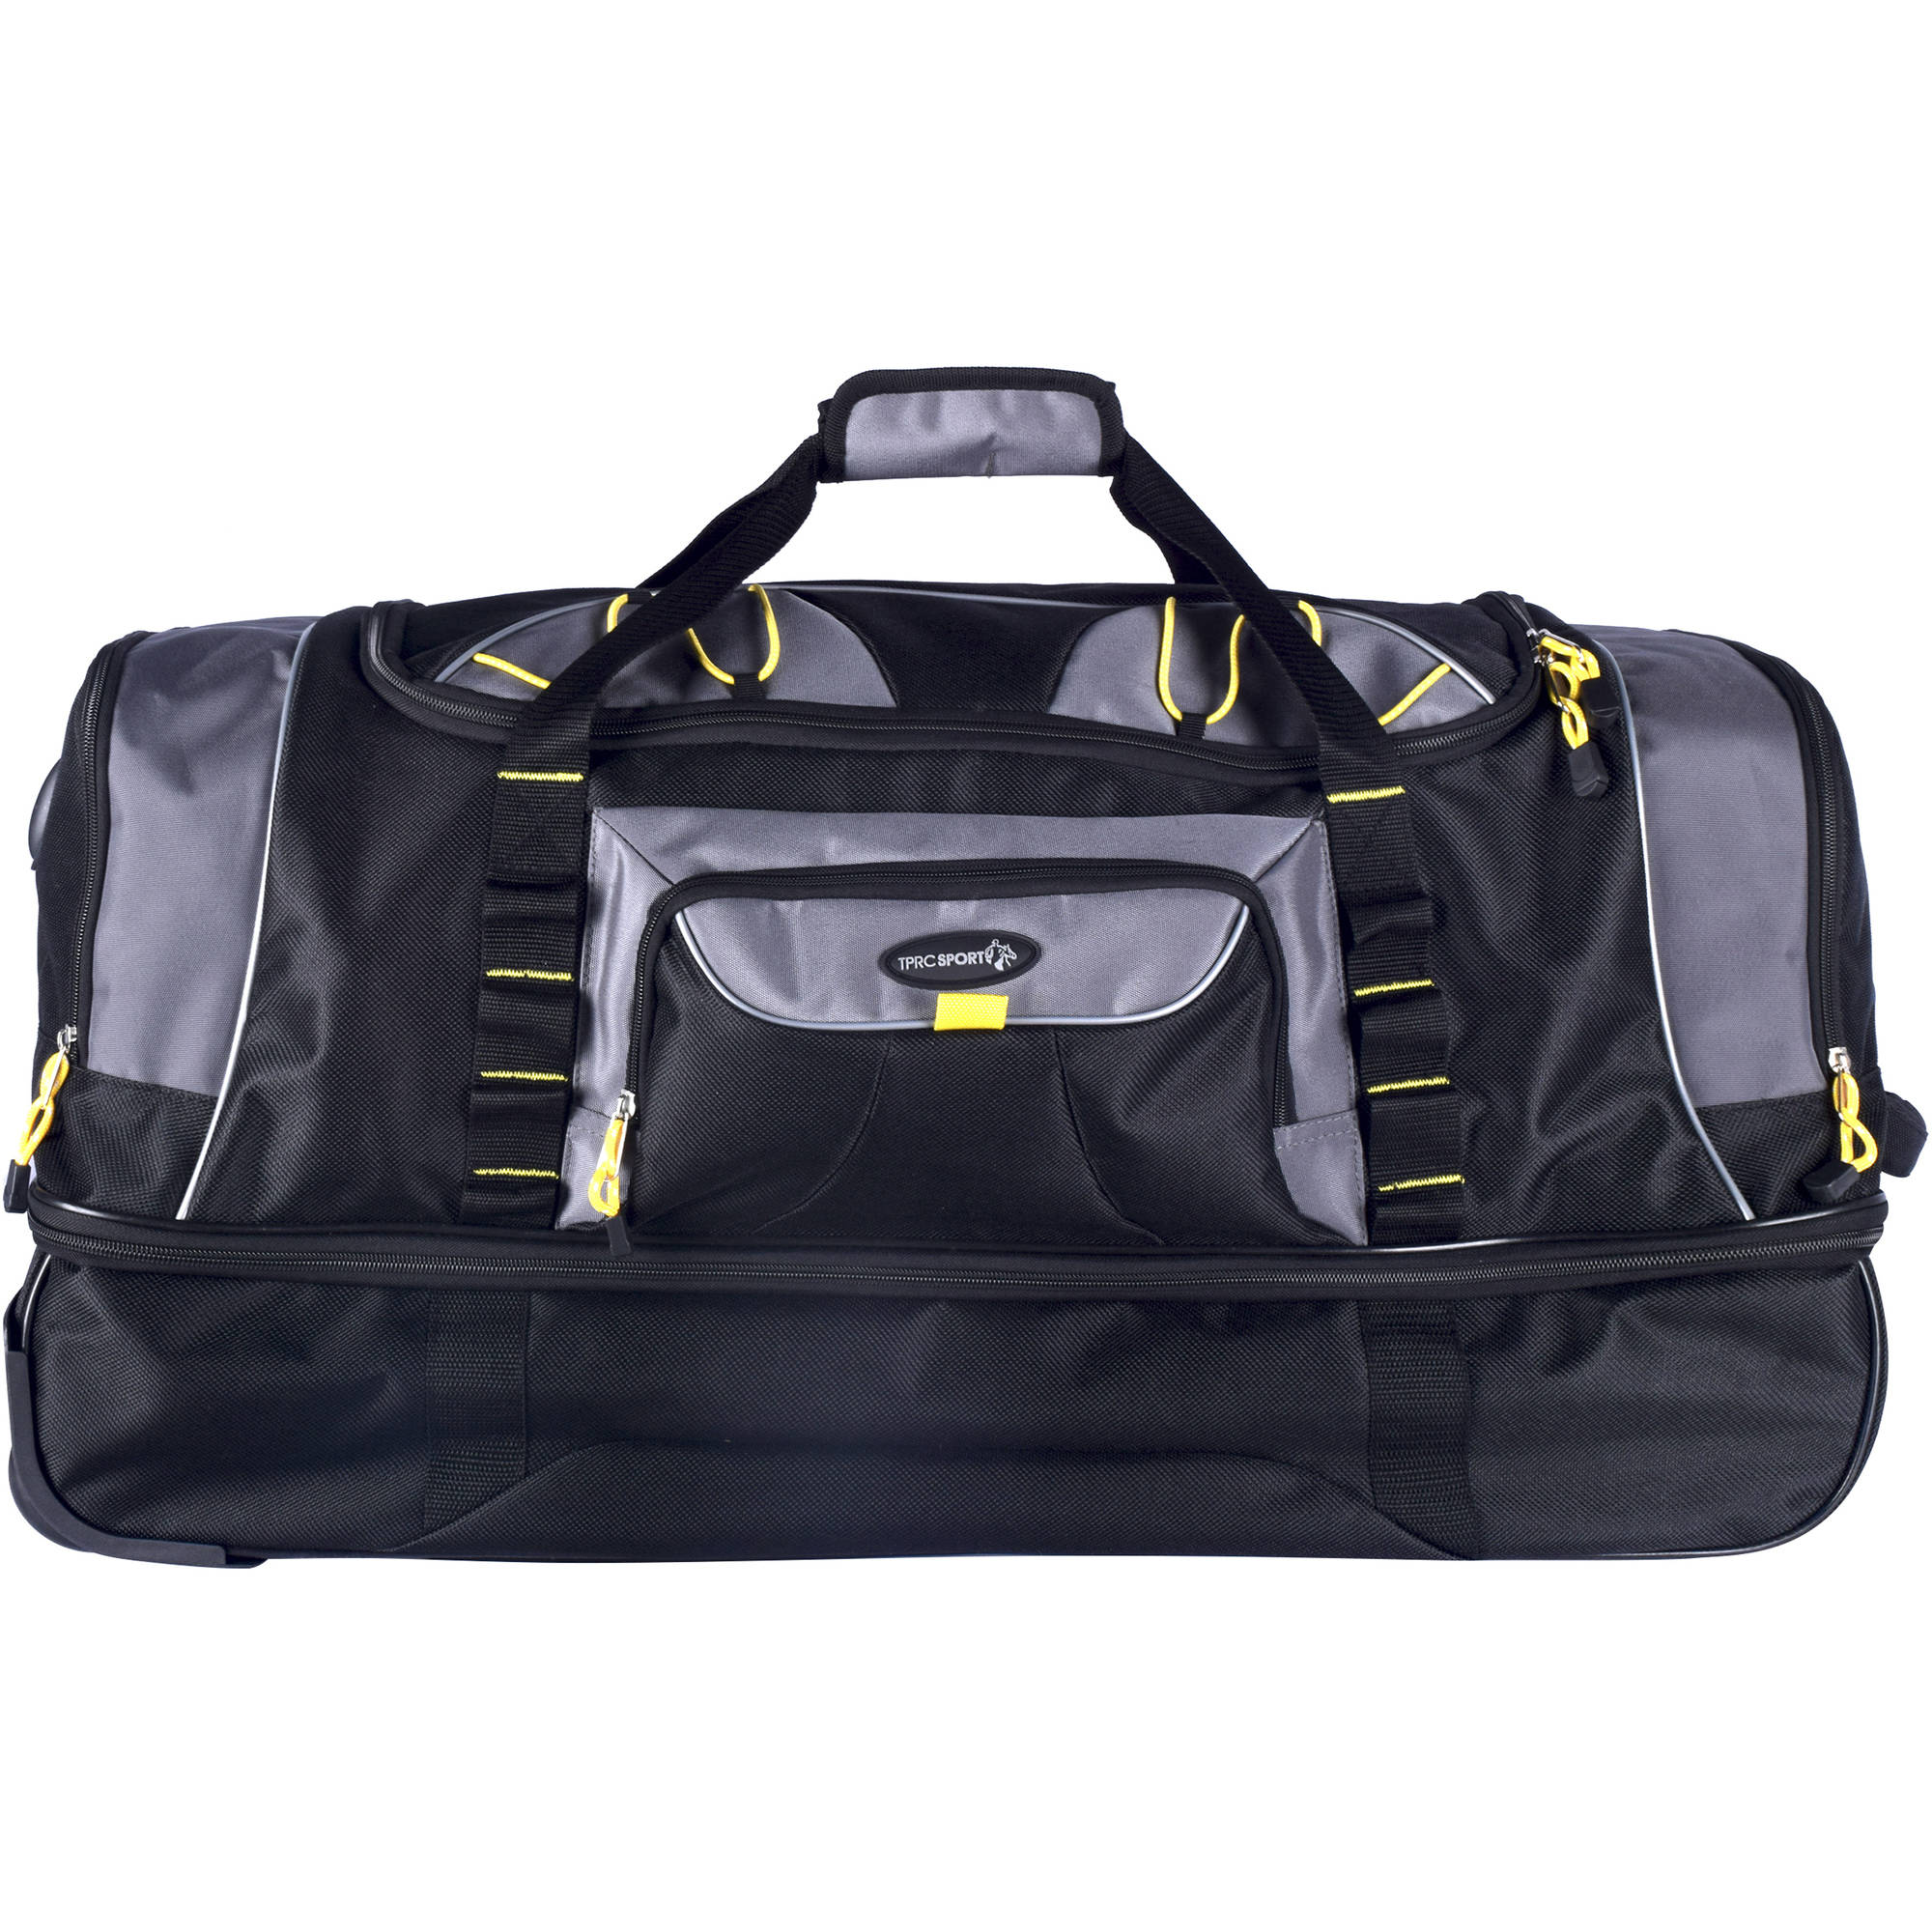 Travelers Club Adventurer 30" 2-Section Drop-Bottom Rolling Duffel Travel Luggage - Black with Gray - image 2 of 8